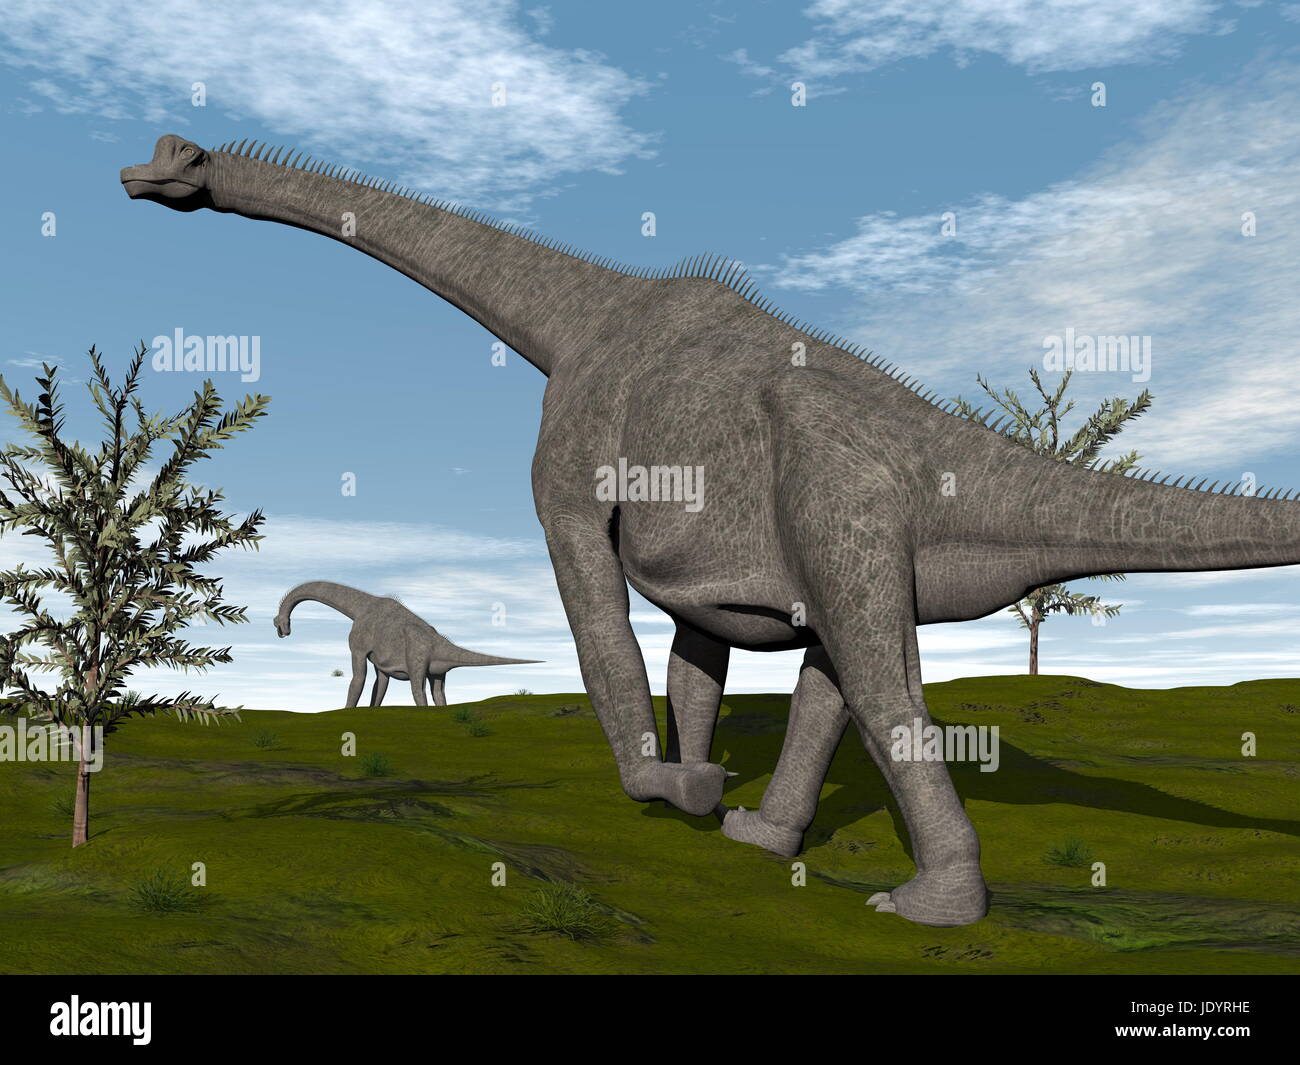 Brachiosaurus dinosaurs walking on the grass by day - 3D render Stock Photo